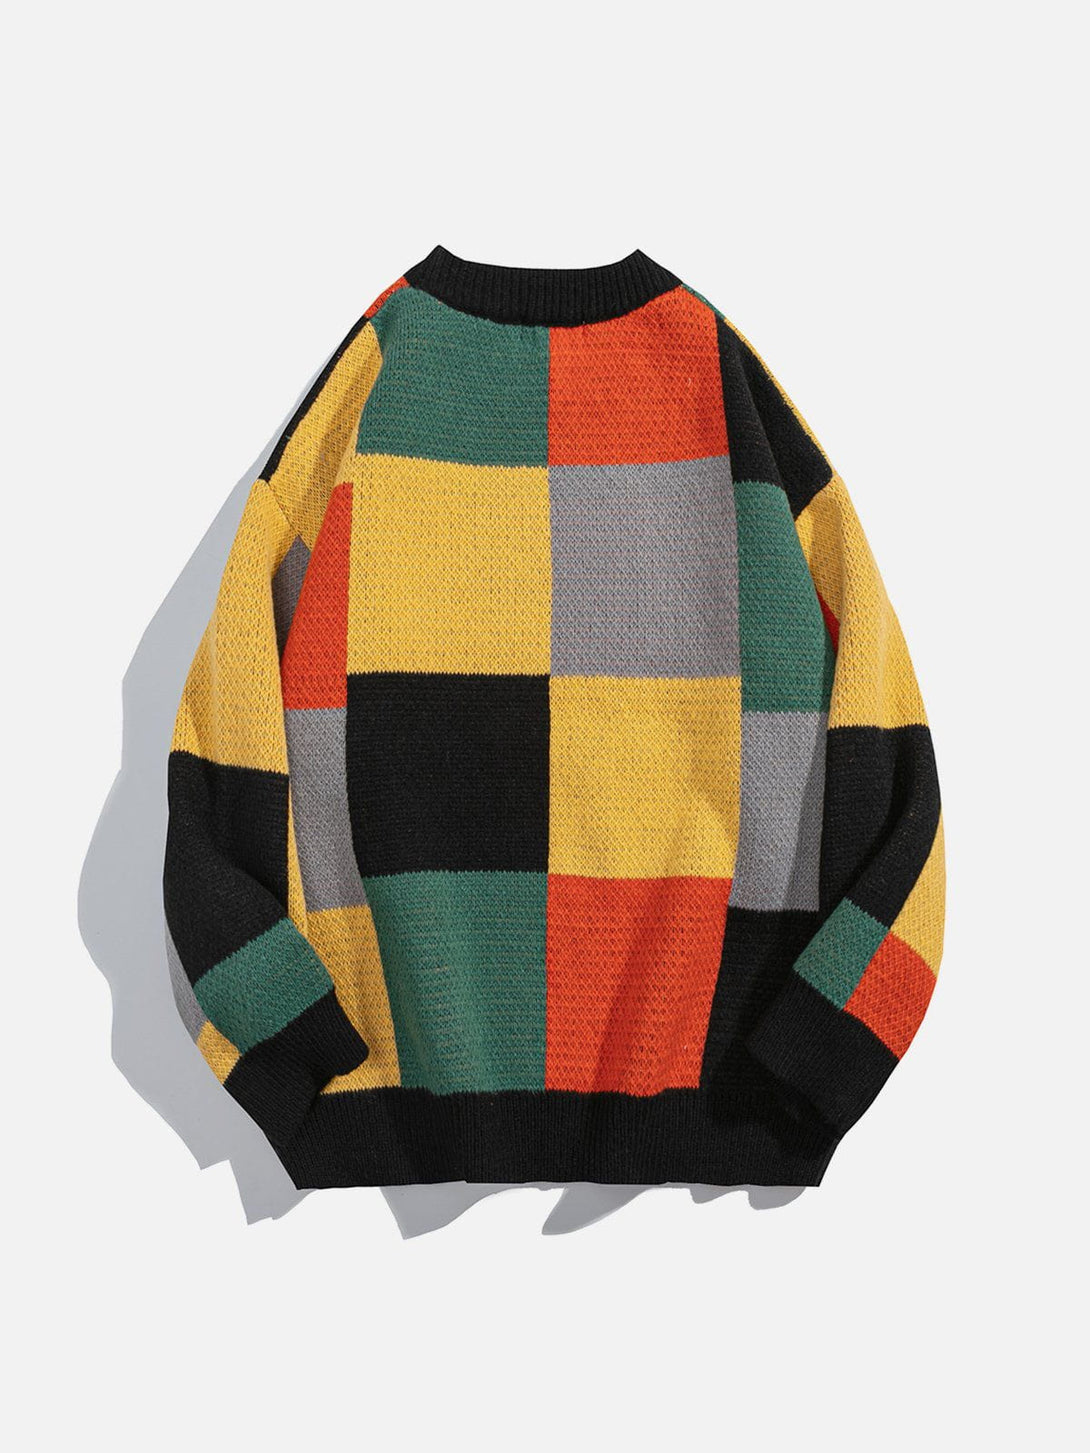 Ellesey - Colorblock Sweater-Streetwear Fashion - ellesey.com